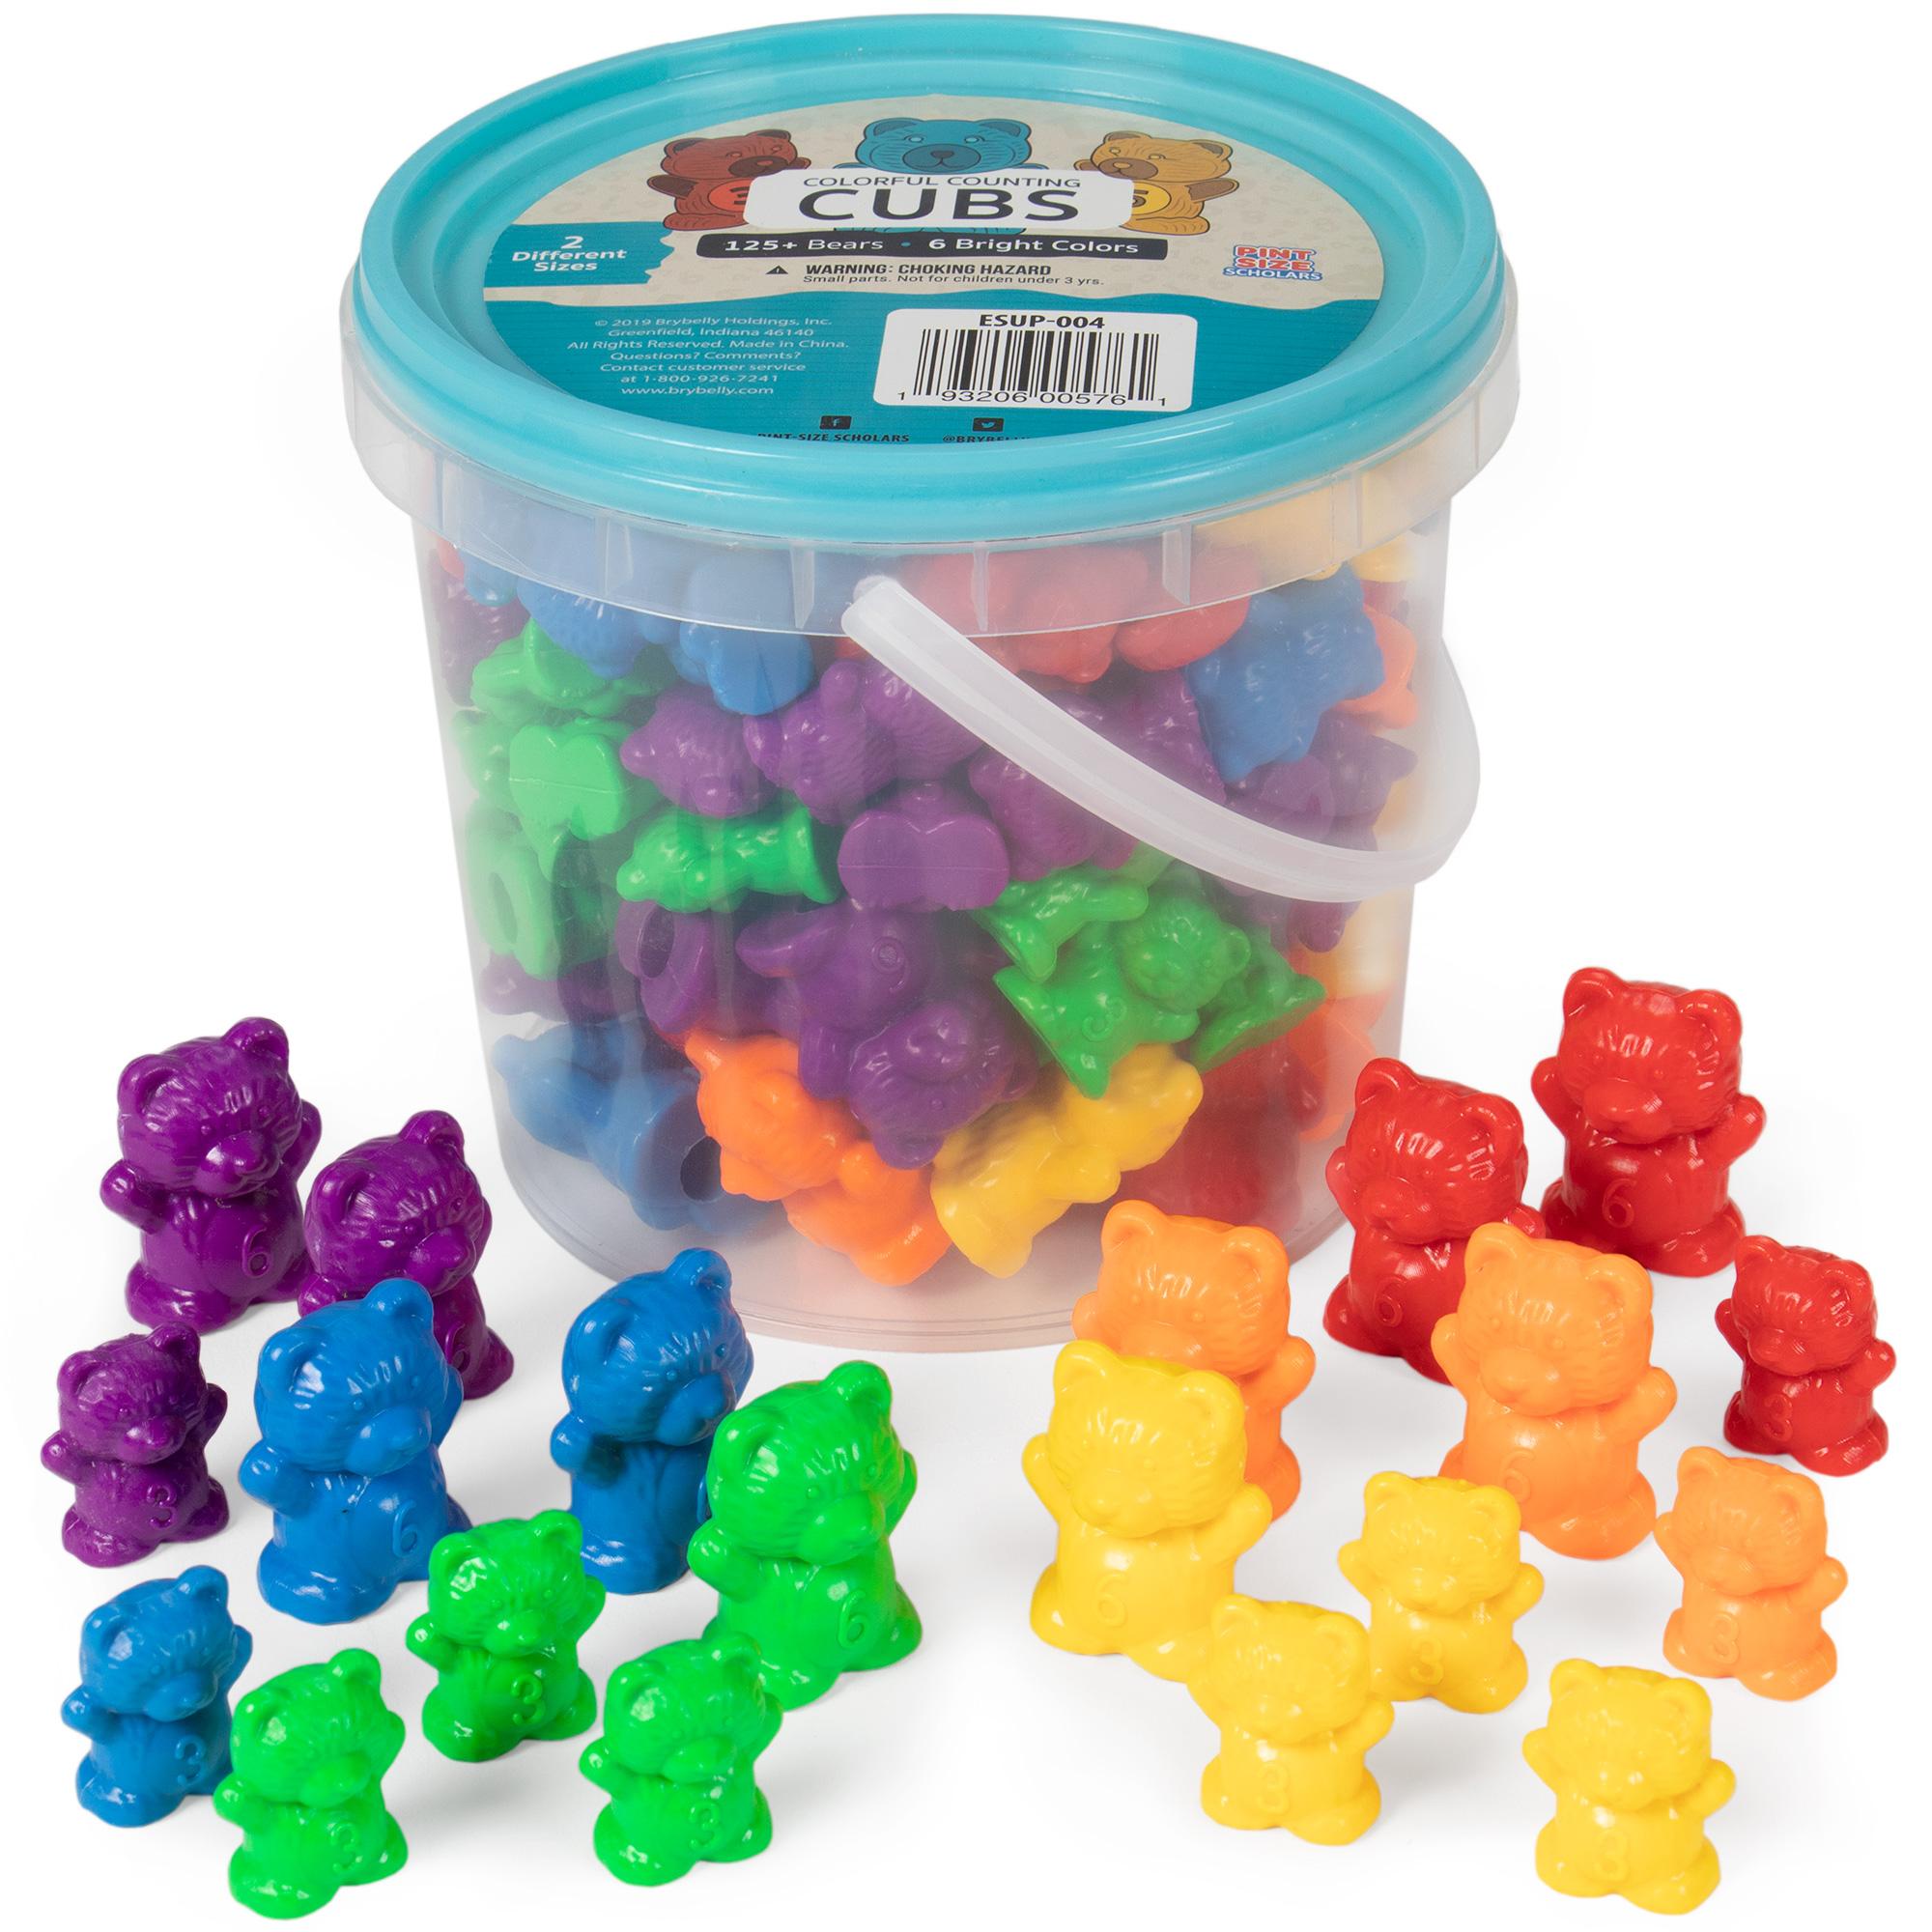 Counting Bears, 125-pack